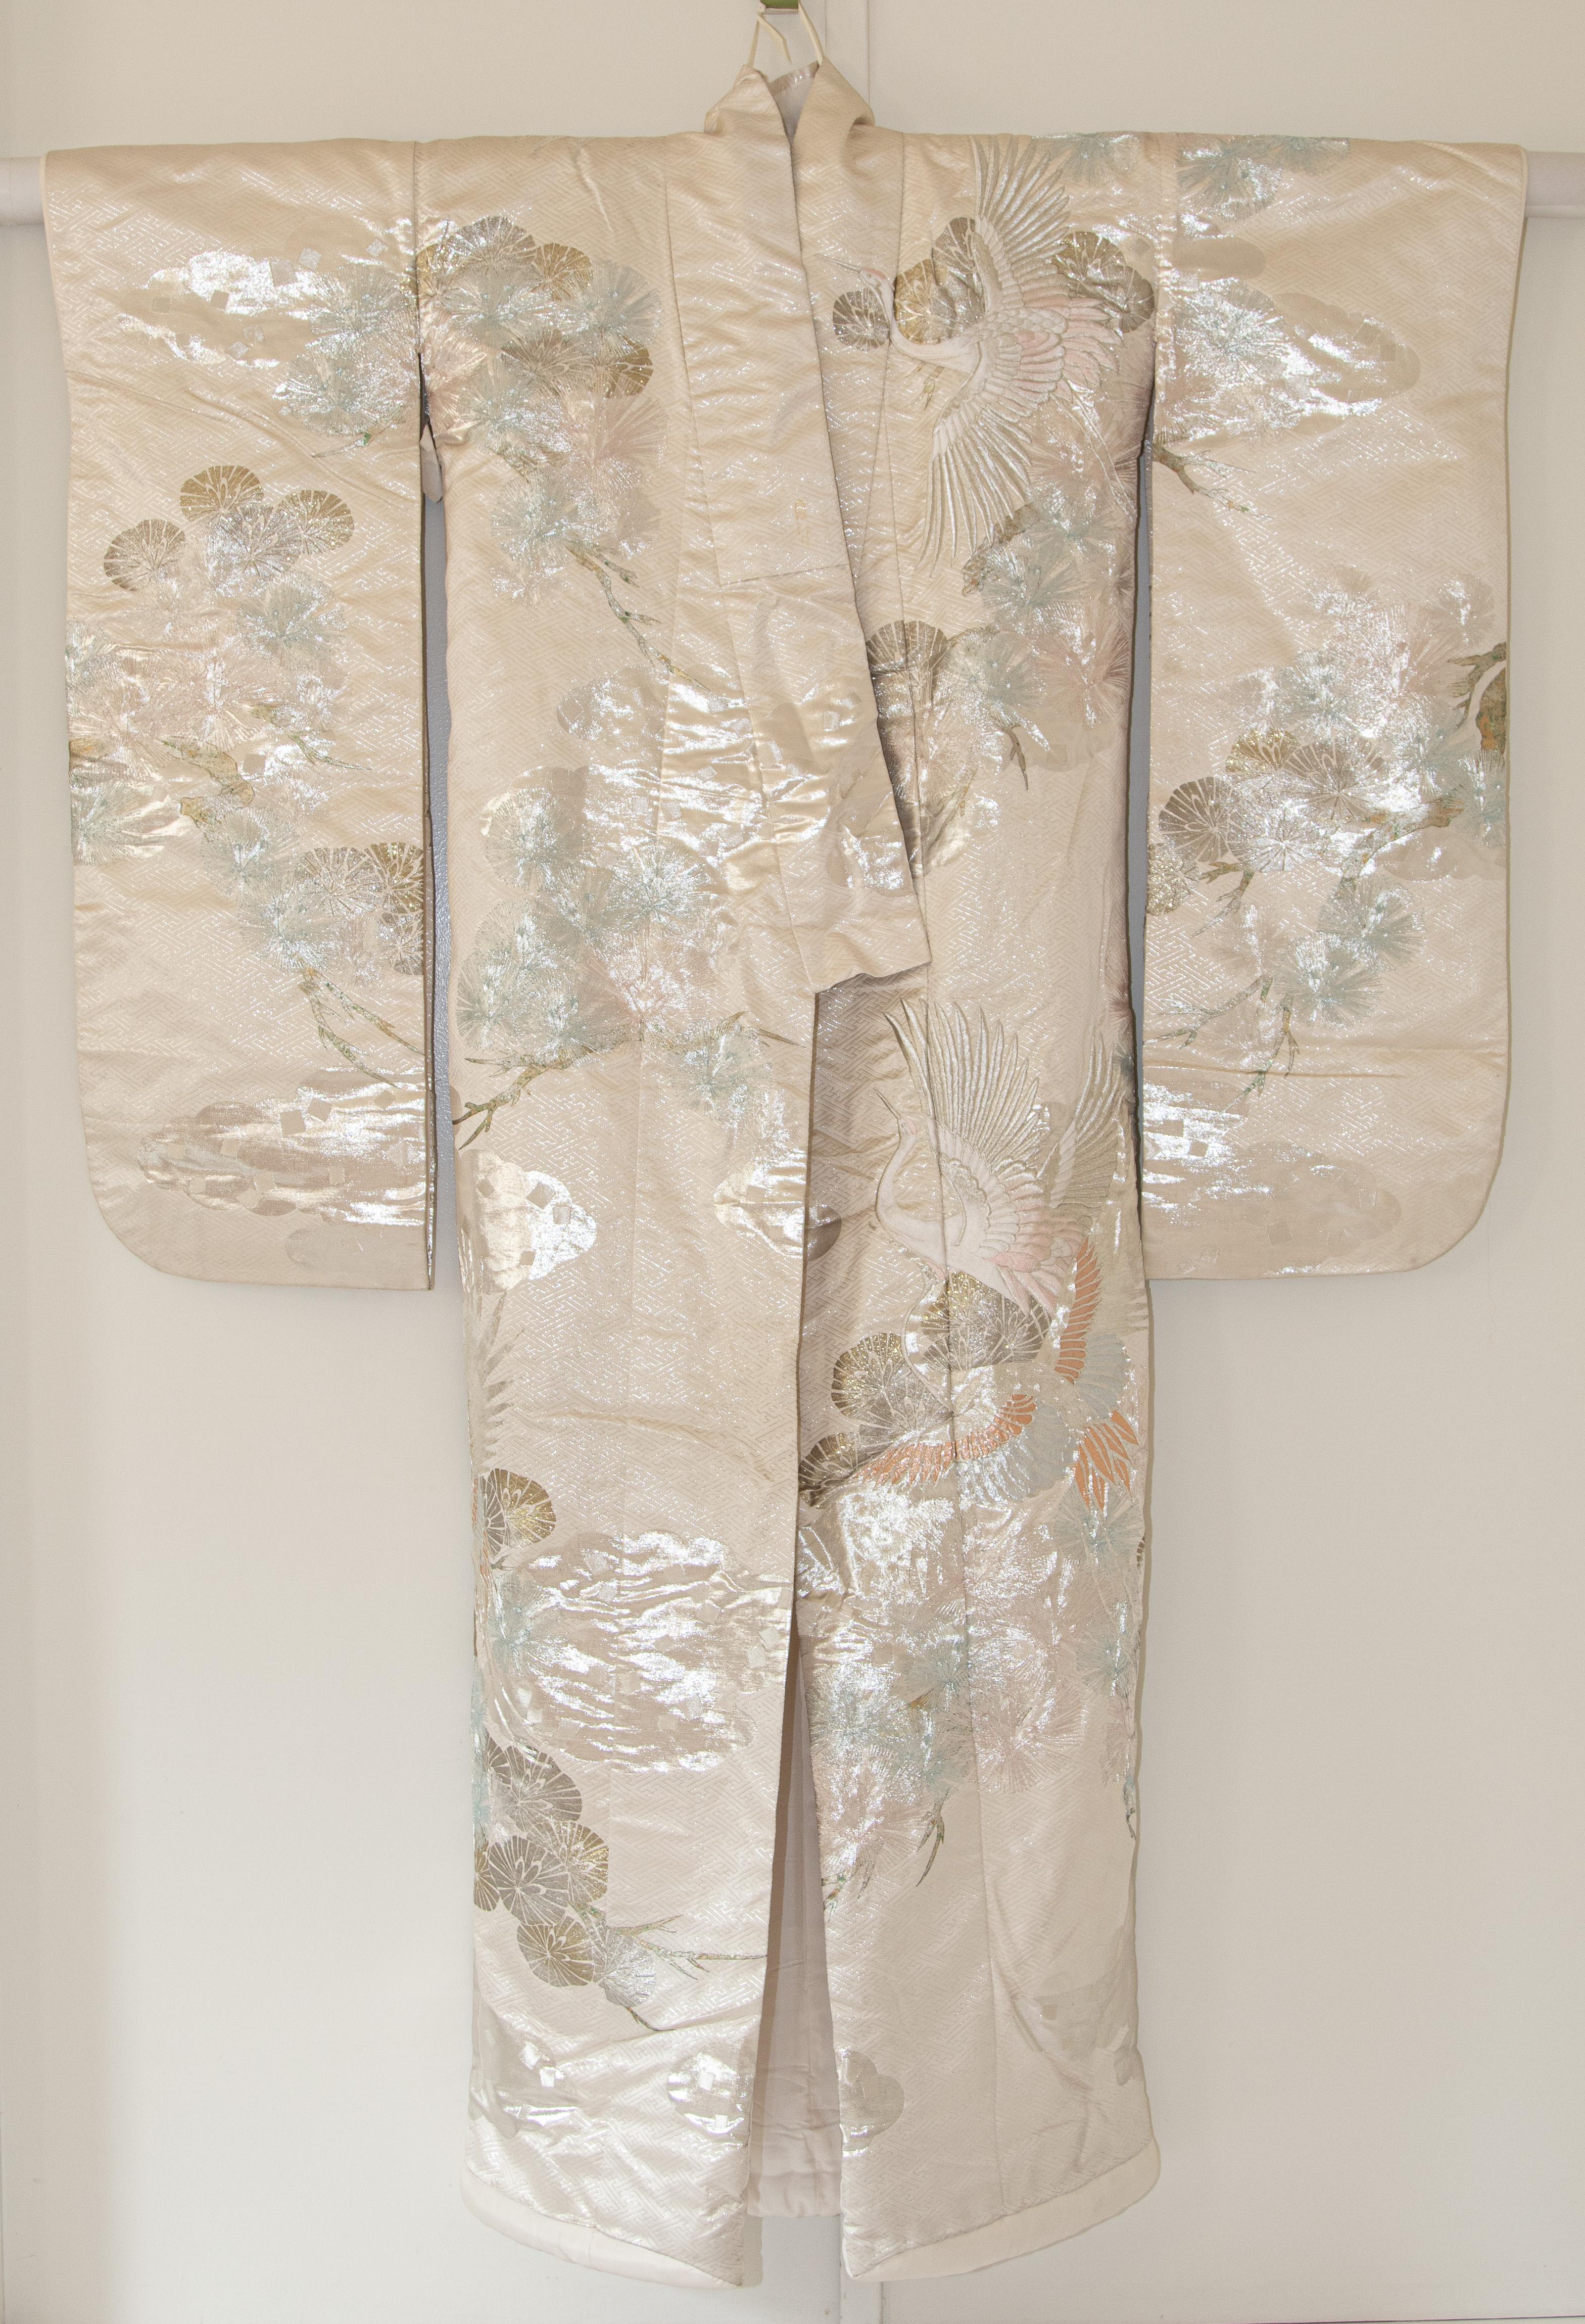 A vintage mid-century silk brocade collectable Japanese ceremonial wedding kimono.
One of a kind handcrafted fabulous museum quality ceremonial piece in white silk with intricate detailed hand-embroidery throughout accented with peacock lame threads